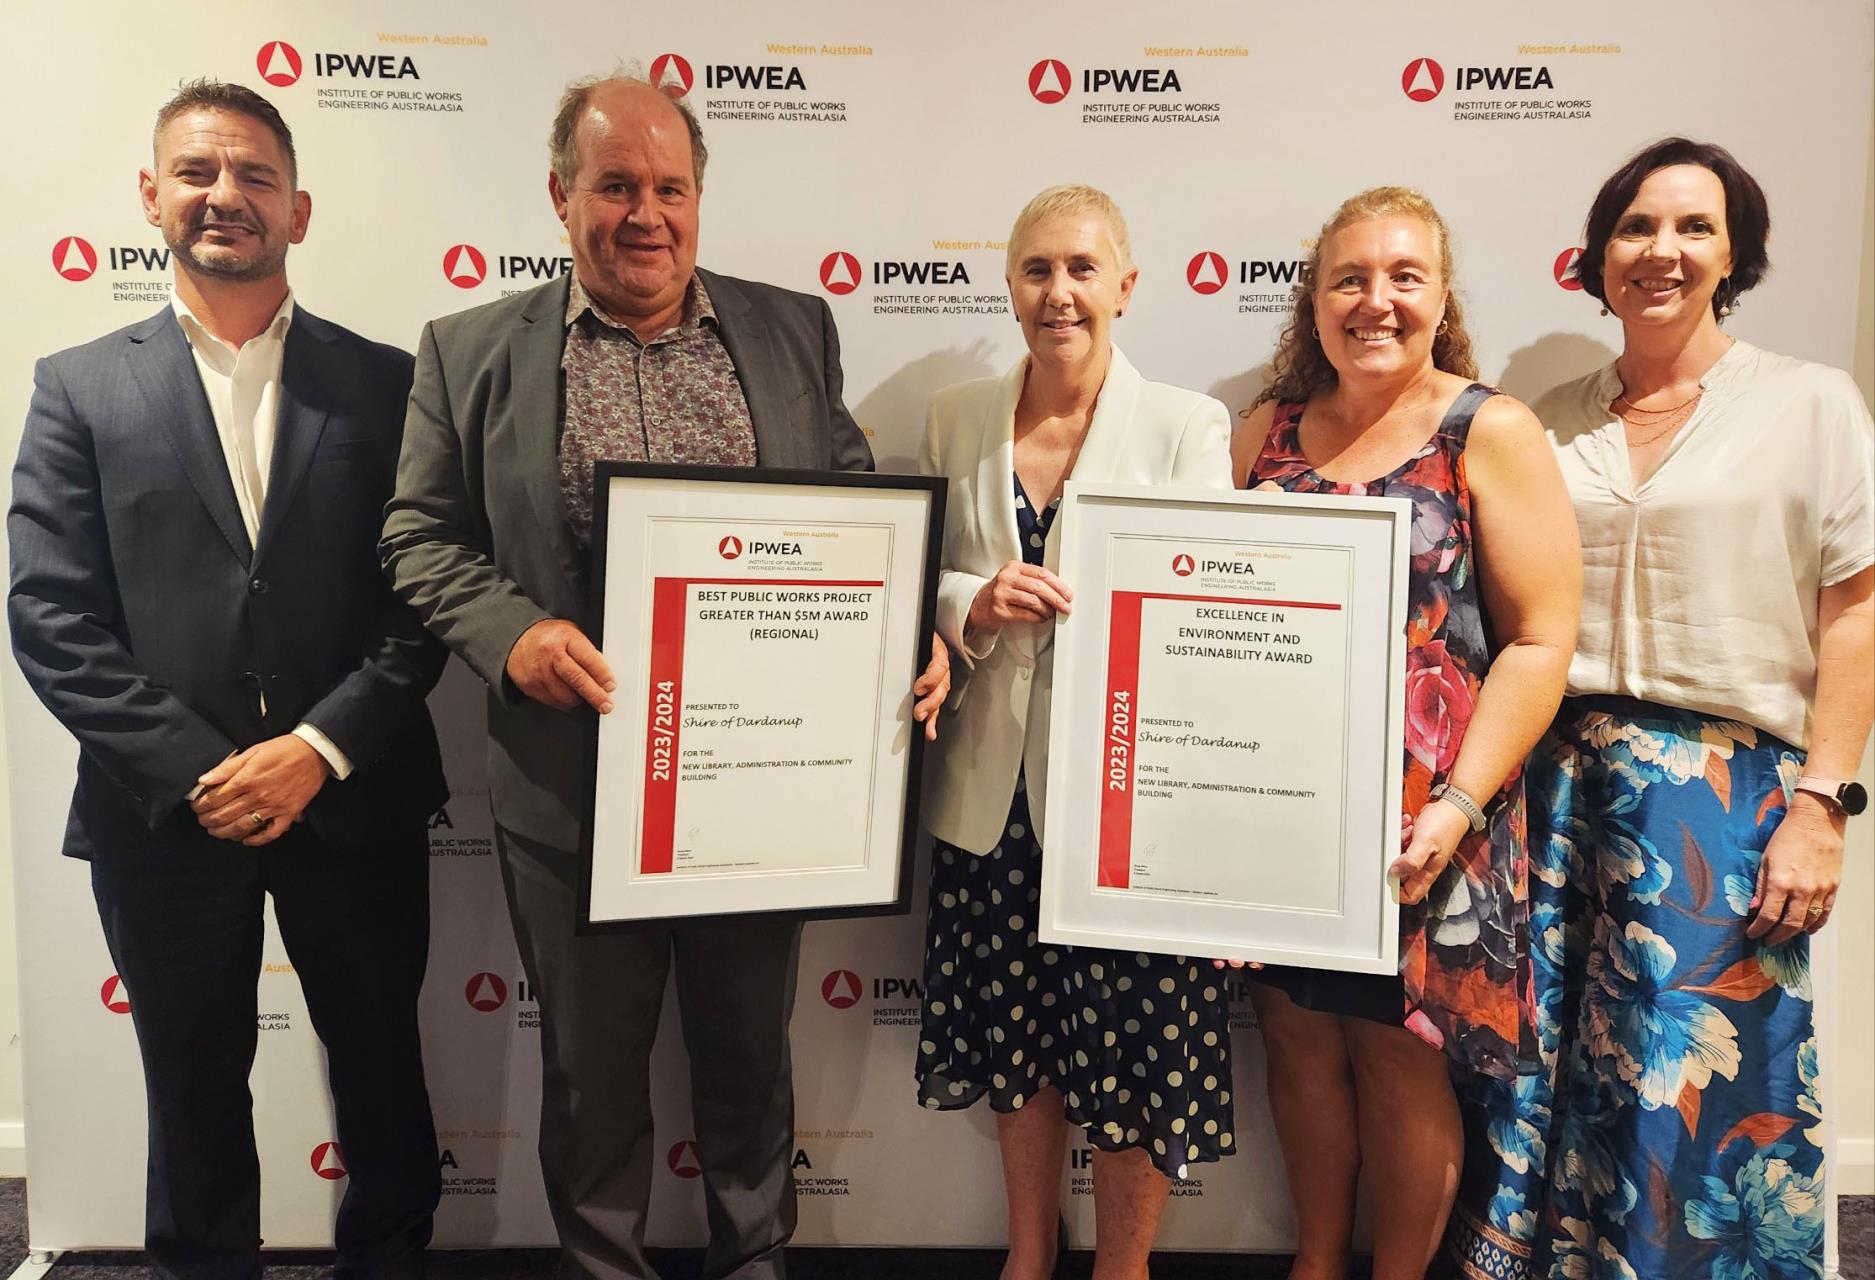 The Shire of Dardanup’s newly constructed Library, Administration, and Community Building (far right) claimed two distinguished awards at the Institute of Public Works Engineering Australasia (IPWEA) Awards held on Friday night. Pictured at the awards ceremony are (from left) CEO André Schönfeldt, Shire President Tyrrell Gardiner, Director Special Projects and Community Susan Oosthuizen, Senior Project Officer Belinda Vanvuuren and Councillor Stacey Gillespie.